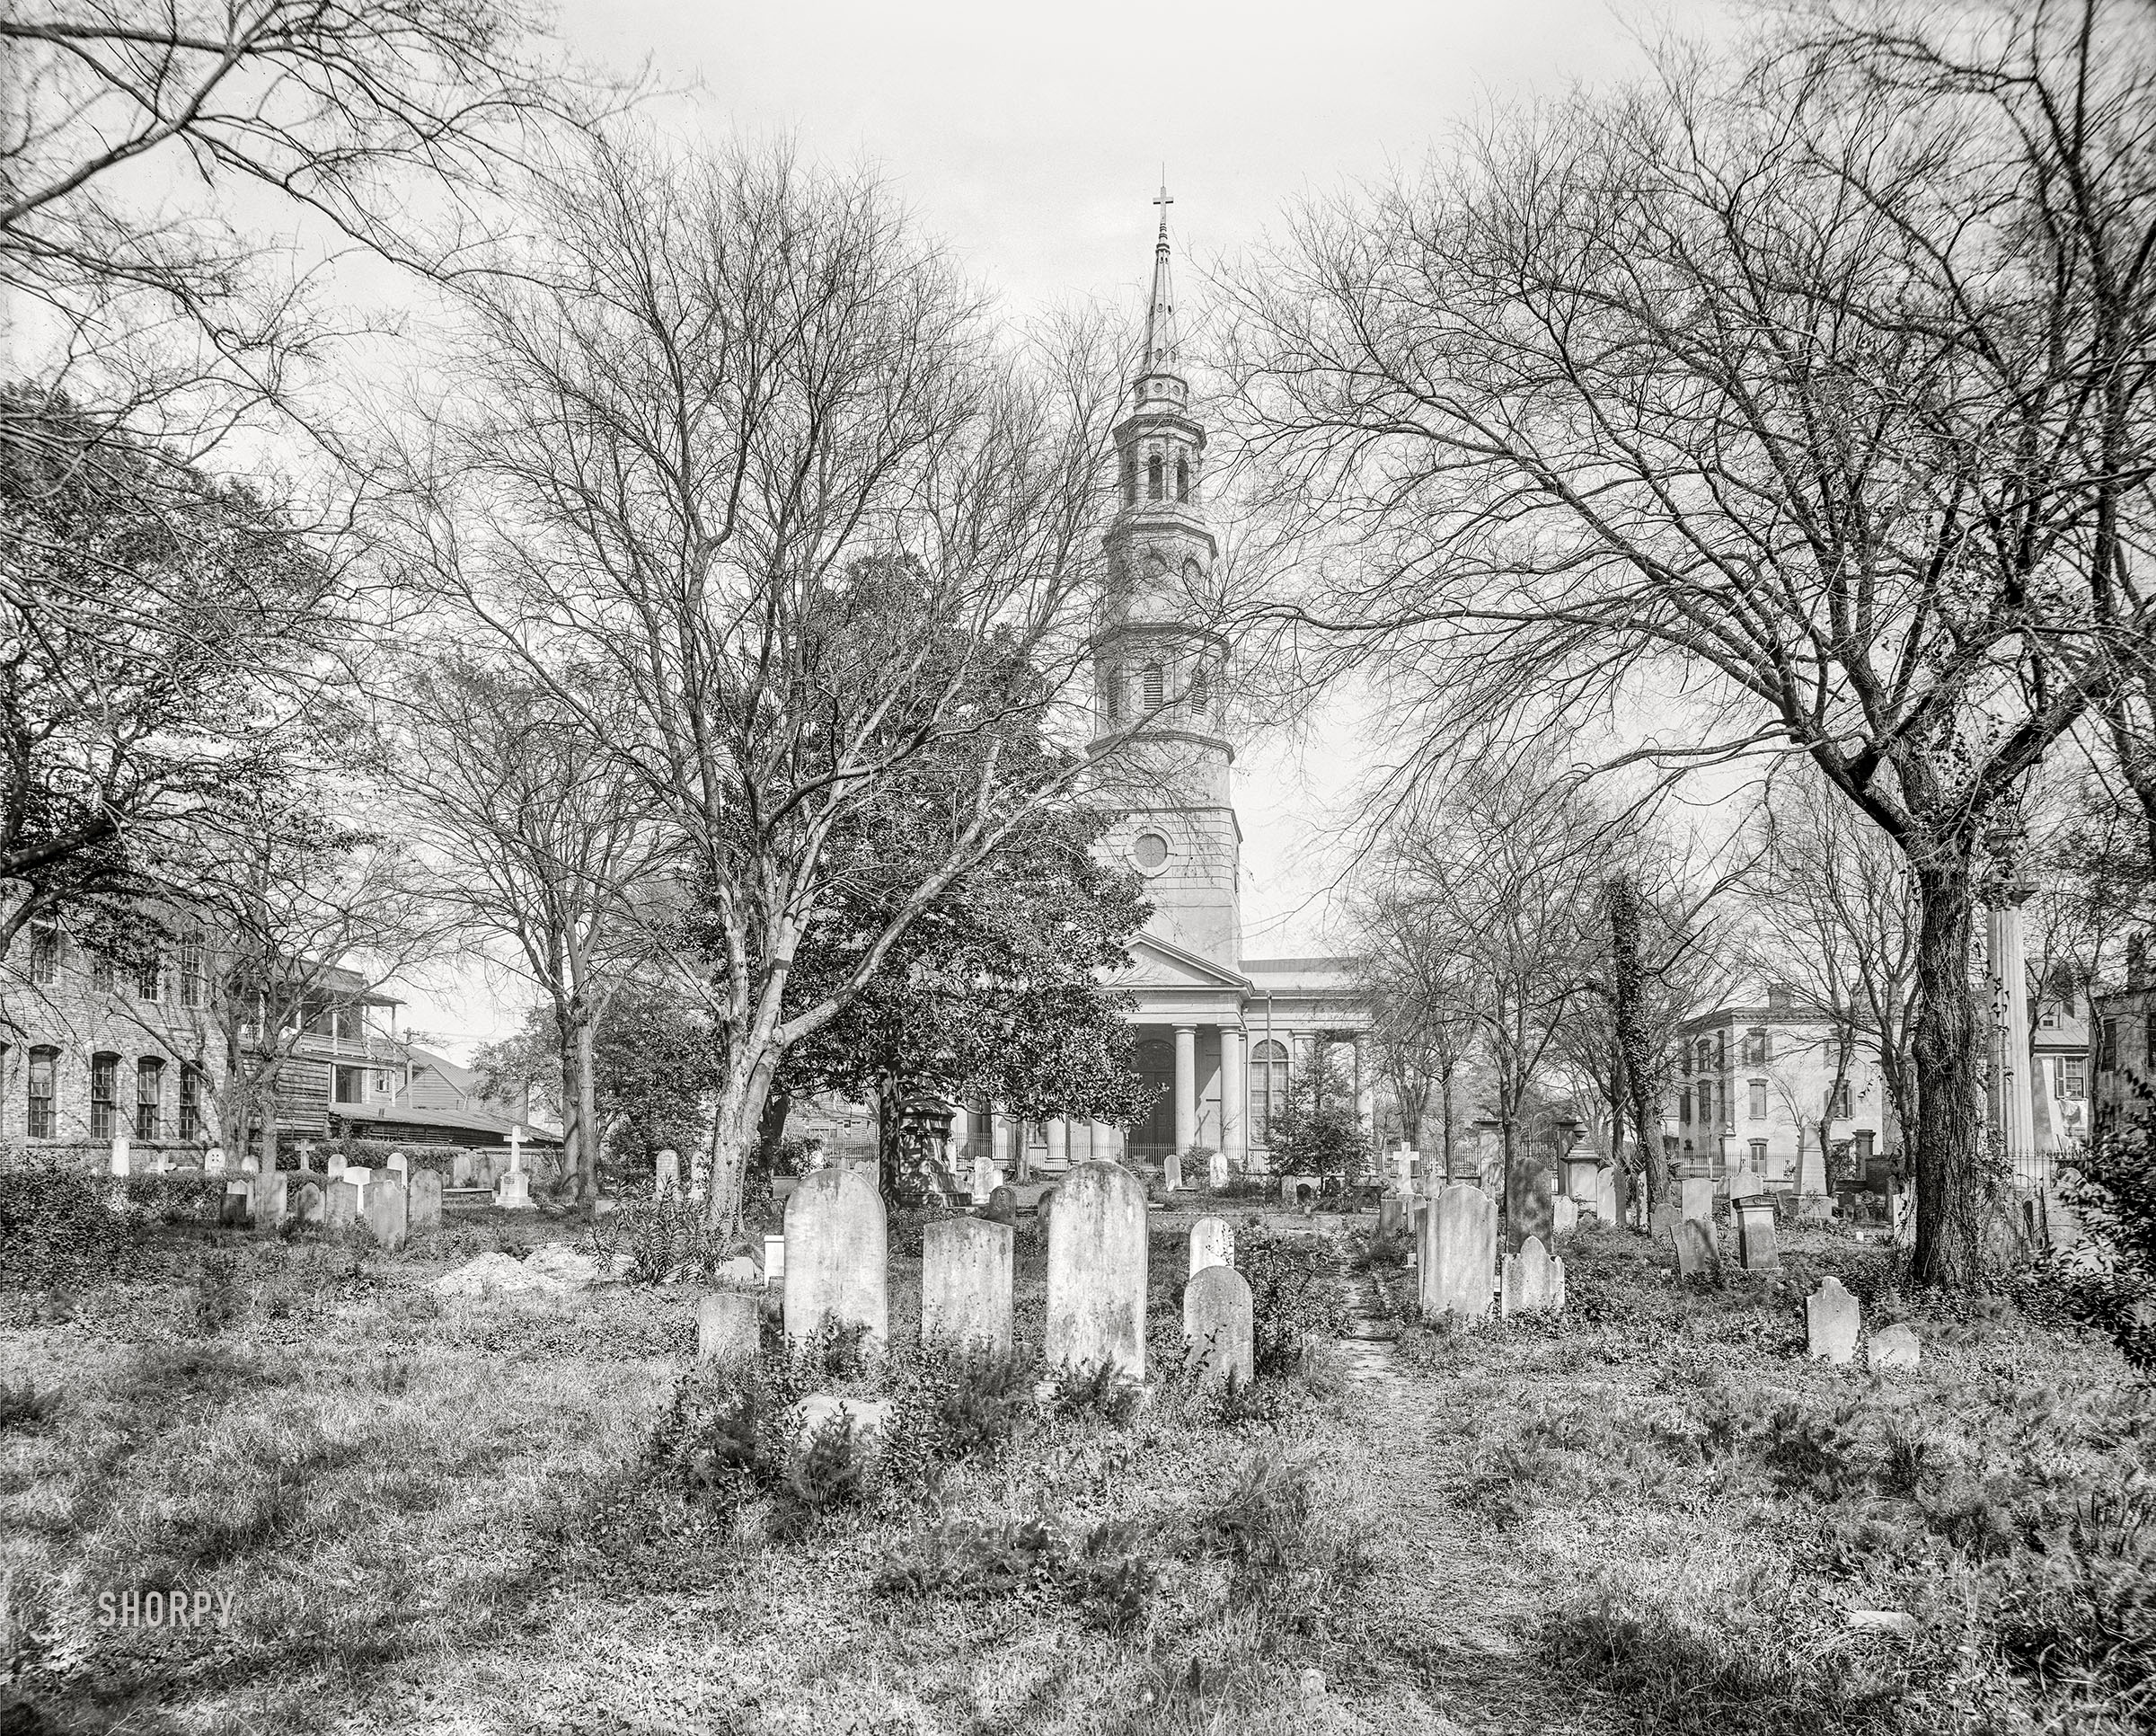 Charleston, South Carolina, circa 1910. "St. Philip's from the old churchyard (Circular Church cemetery)." 8x10 inch dry plate glass negative, Detroit Publishing Company. View full size.